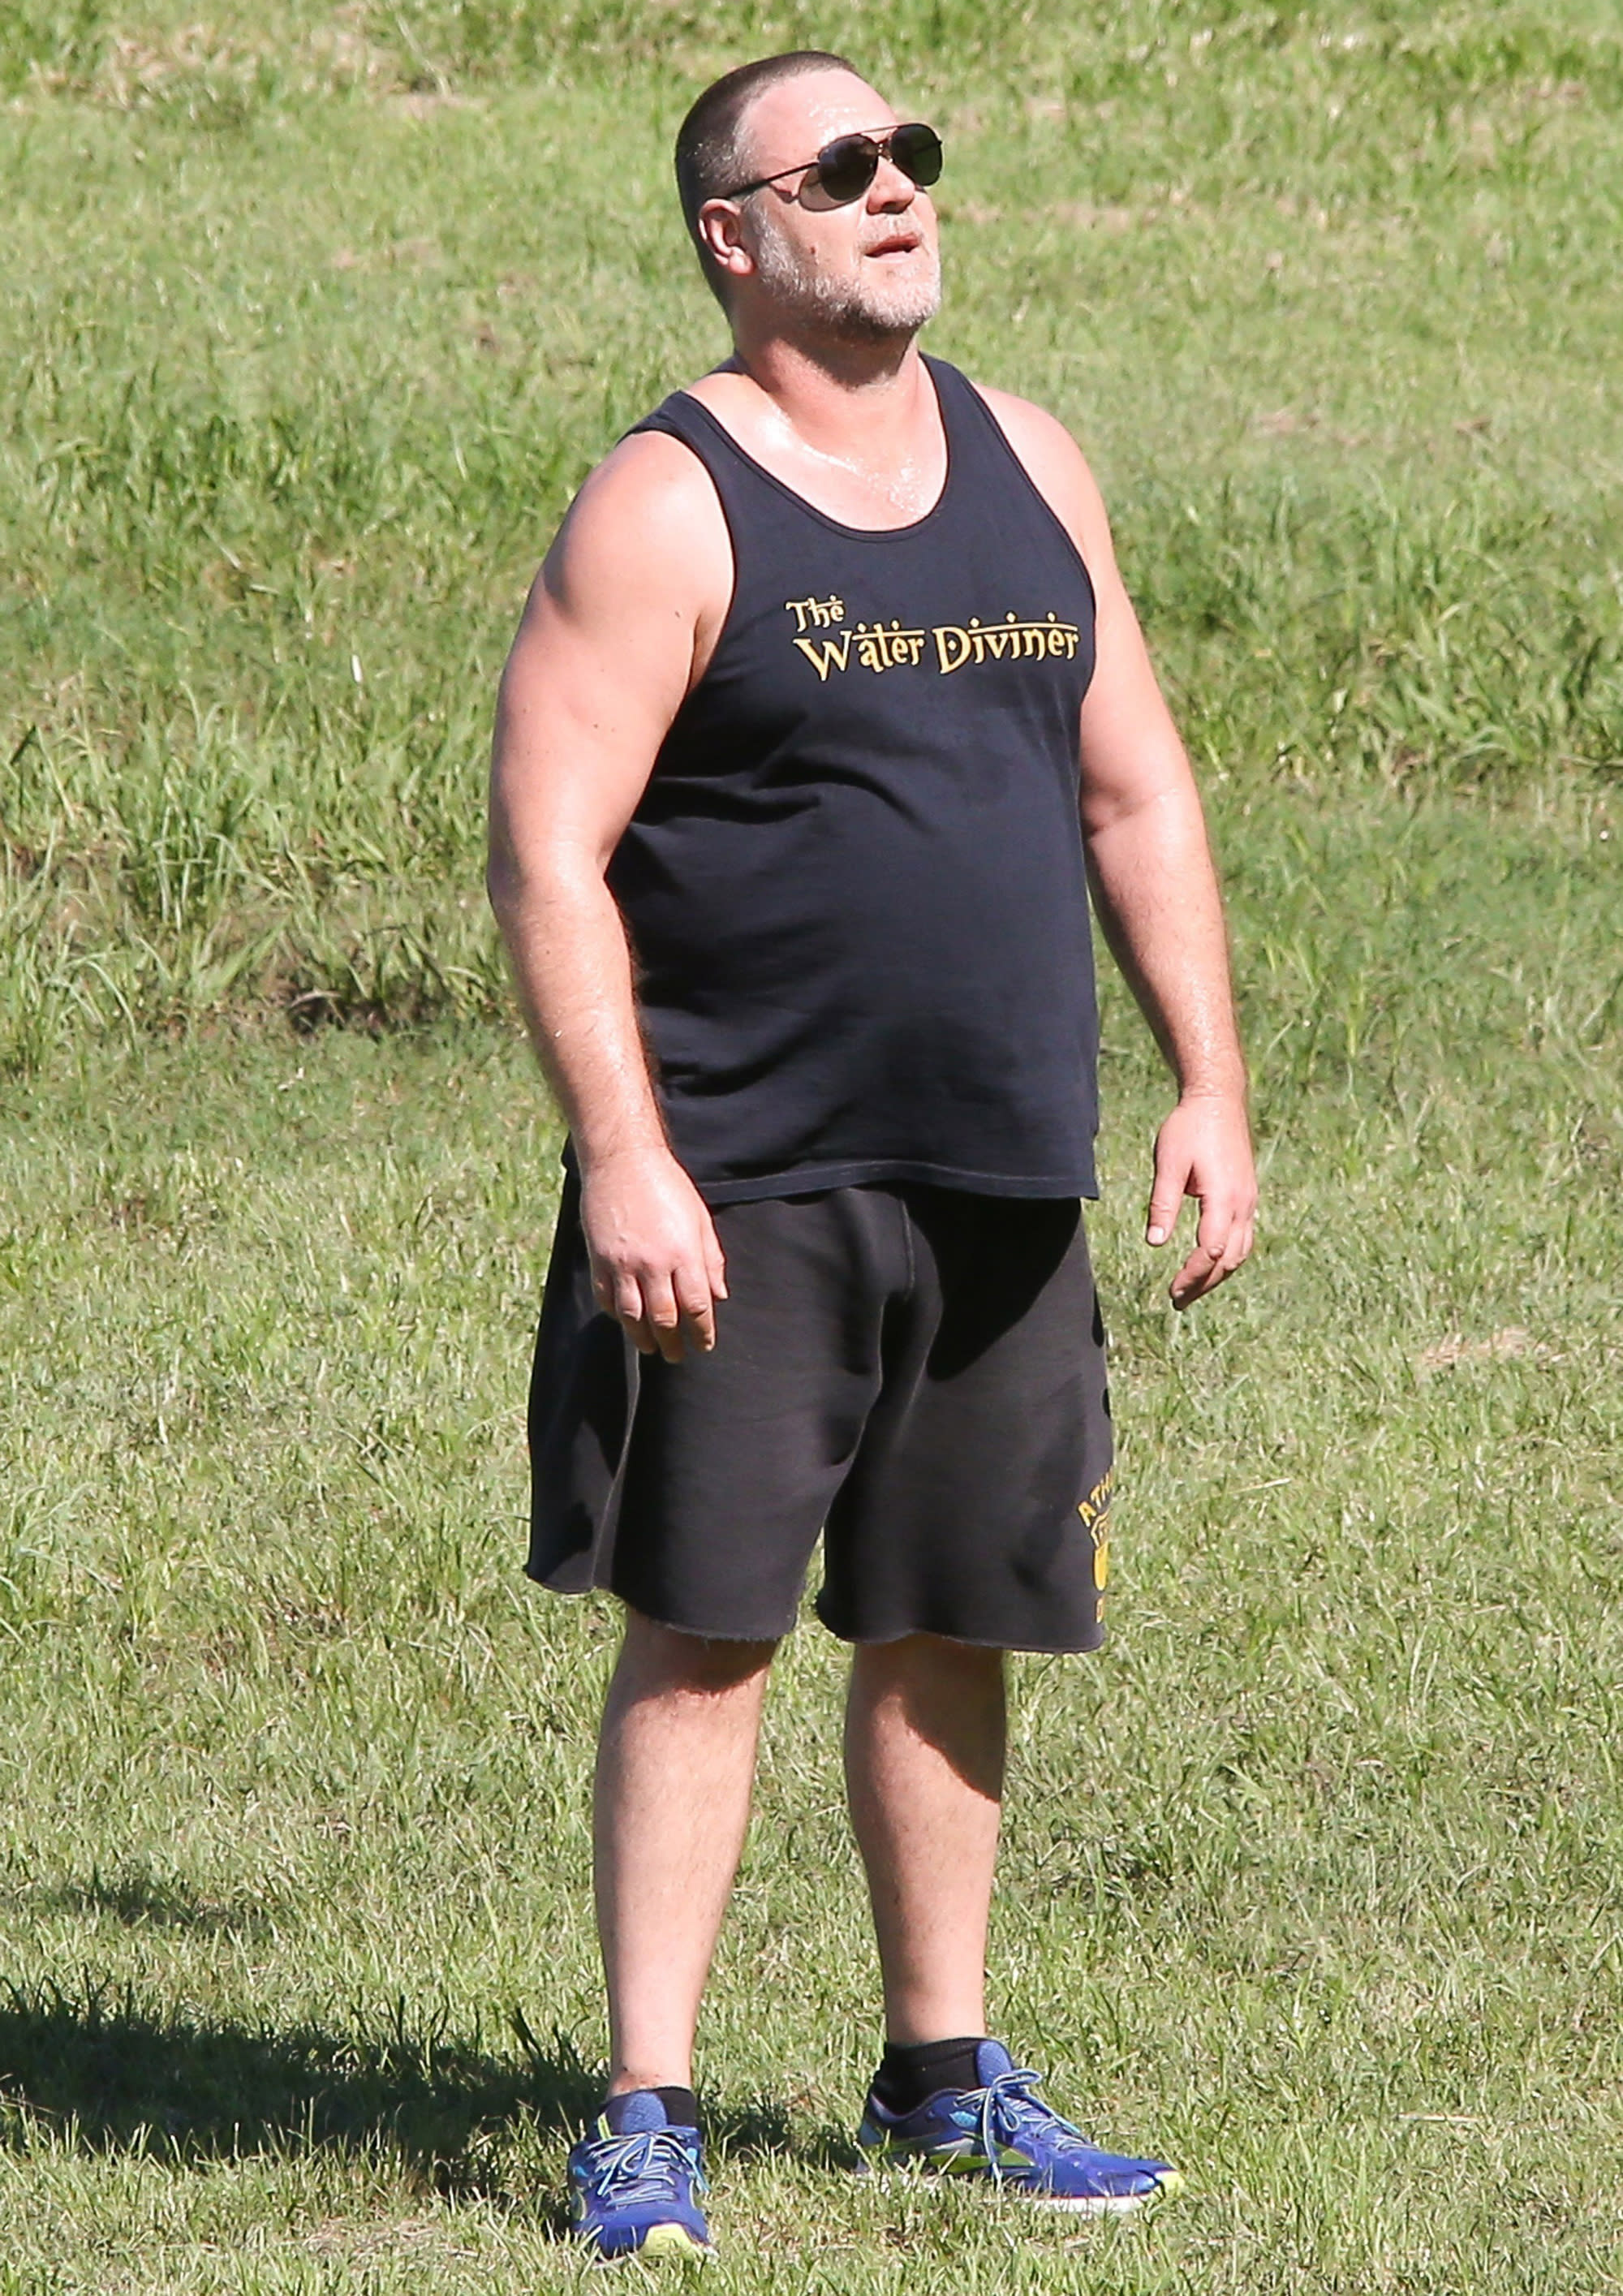 Russell Crowe Hits the Field While Enjoying a Sporty Day in the Sun